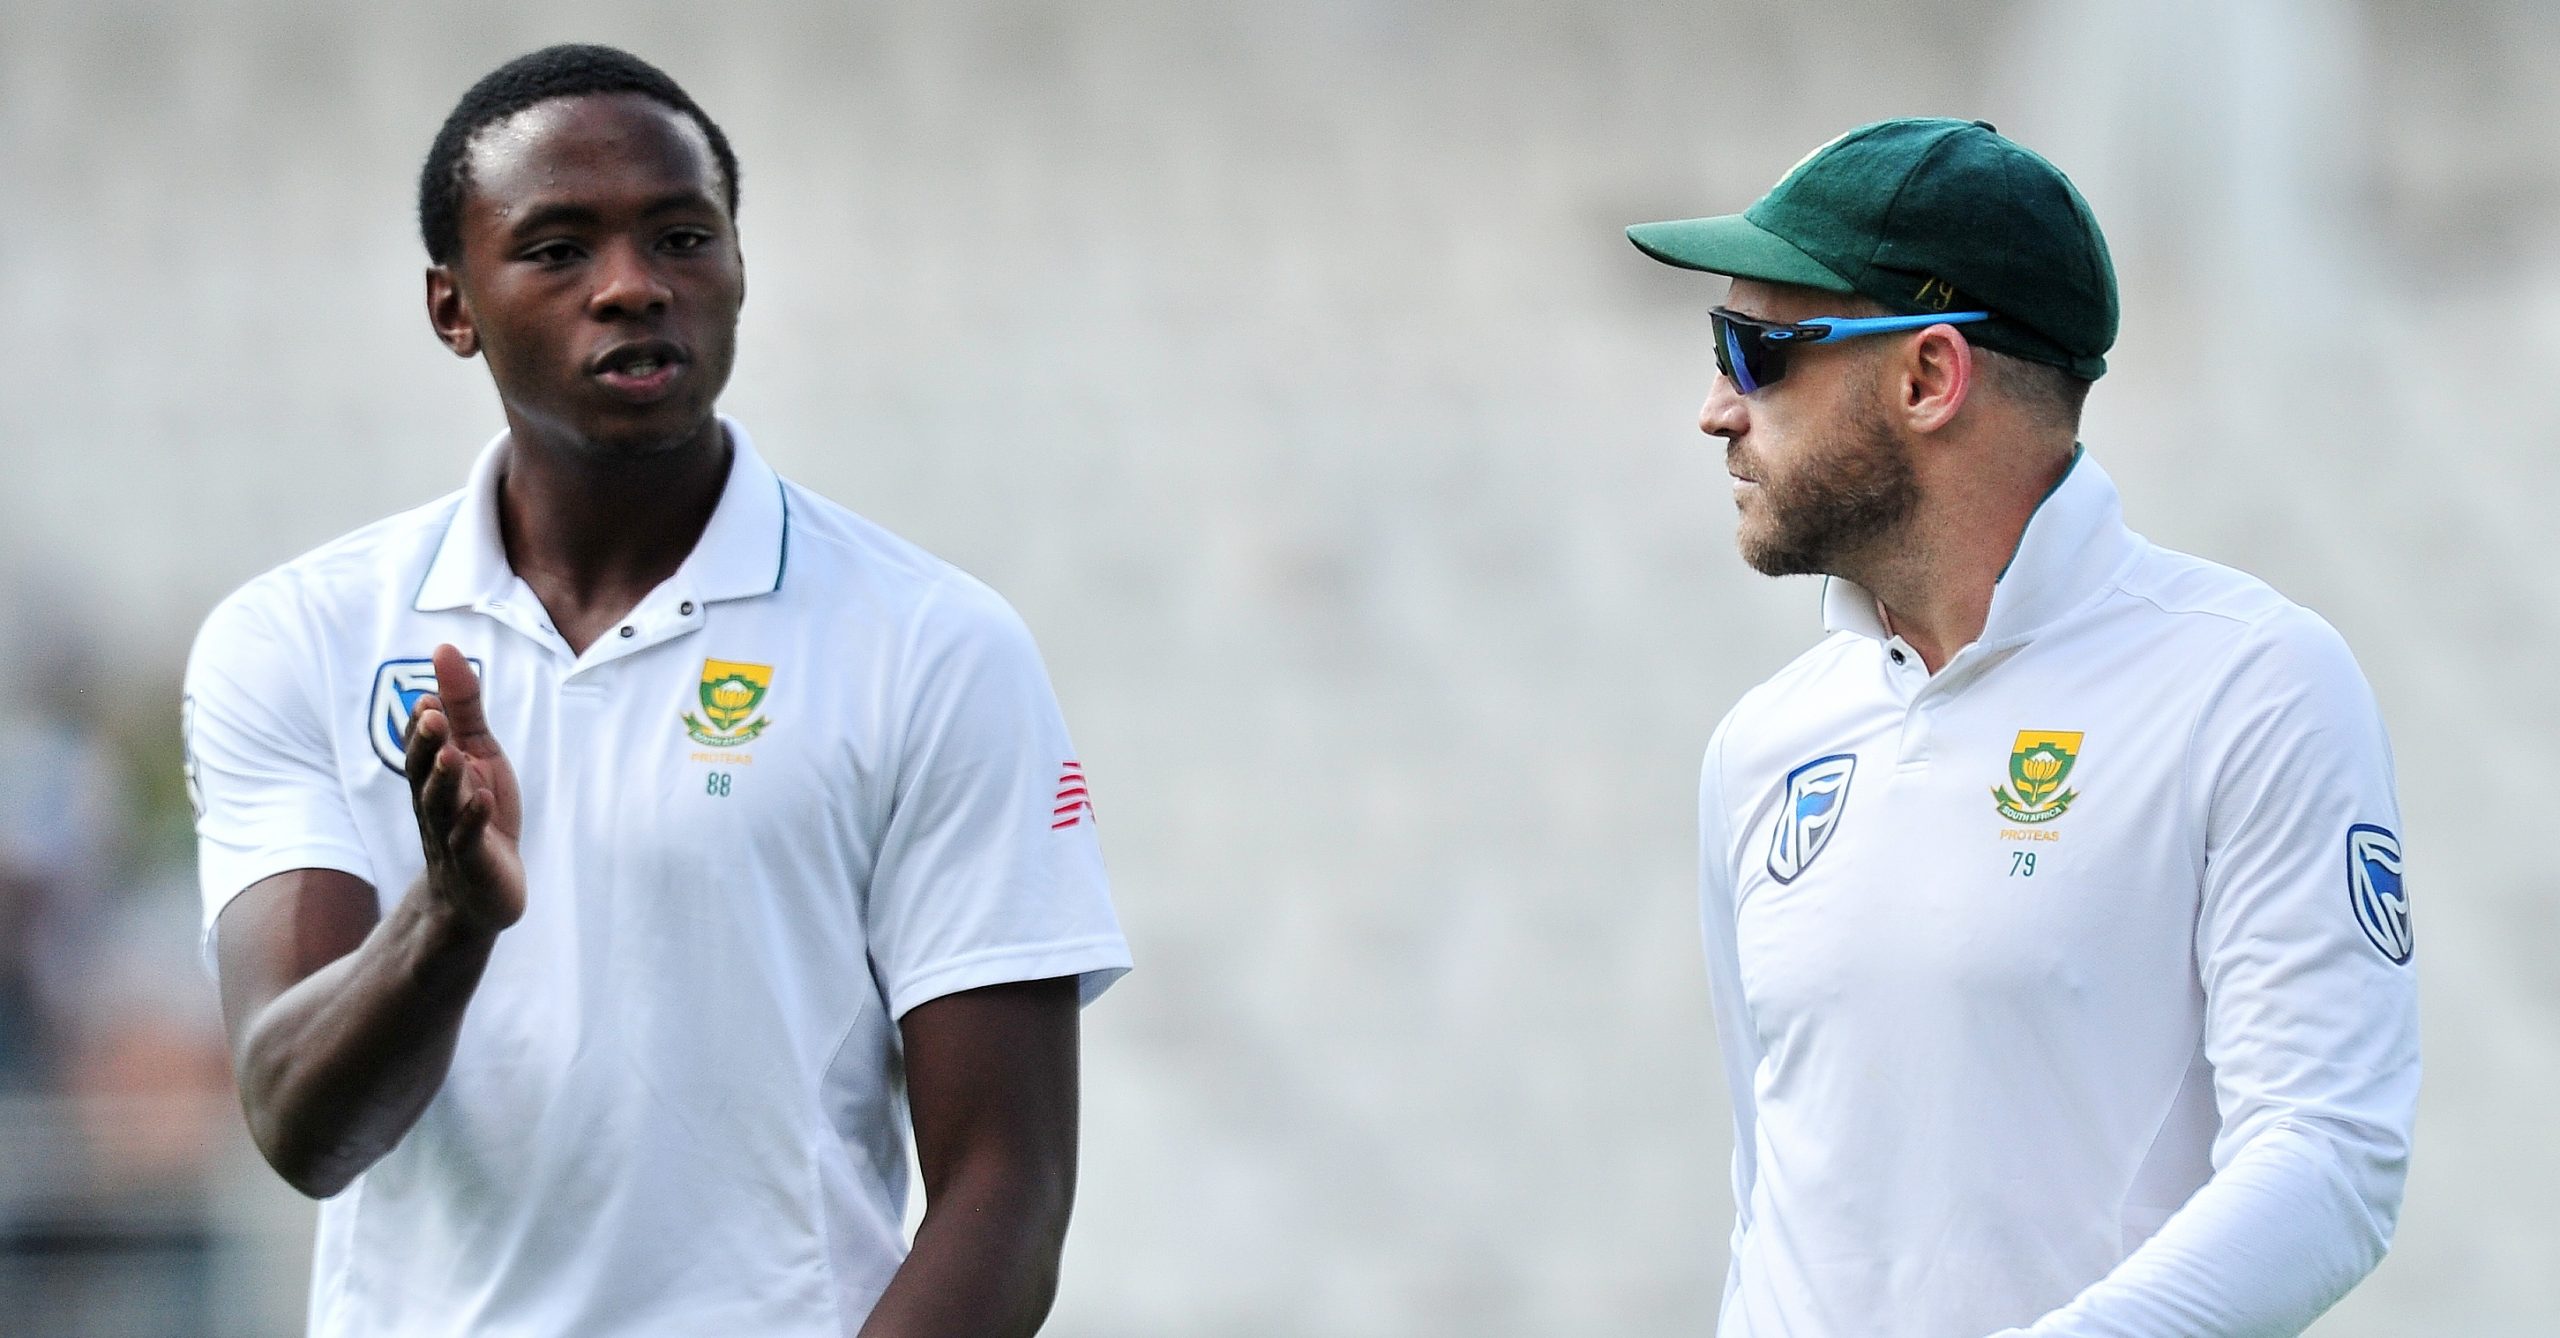 “It’s about the bigger picture” – Kagiso Rabada